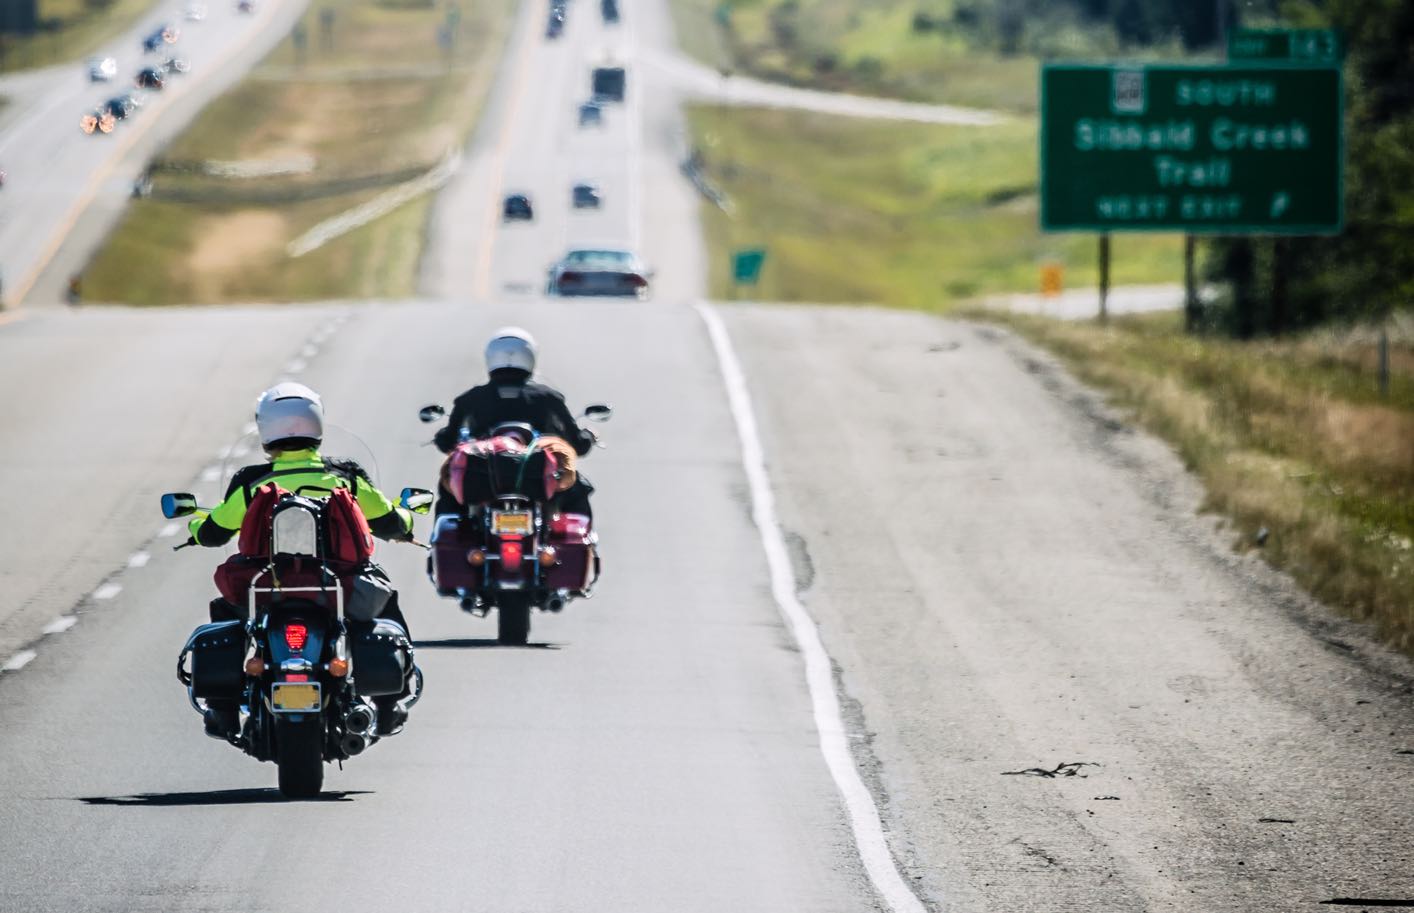 Coast-to-Coast Convenience: The Ins and Outs of Shipping Your Motorcycle from New York to Florida